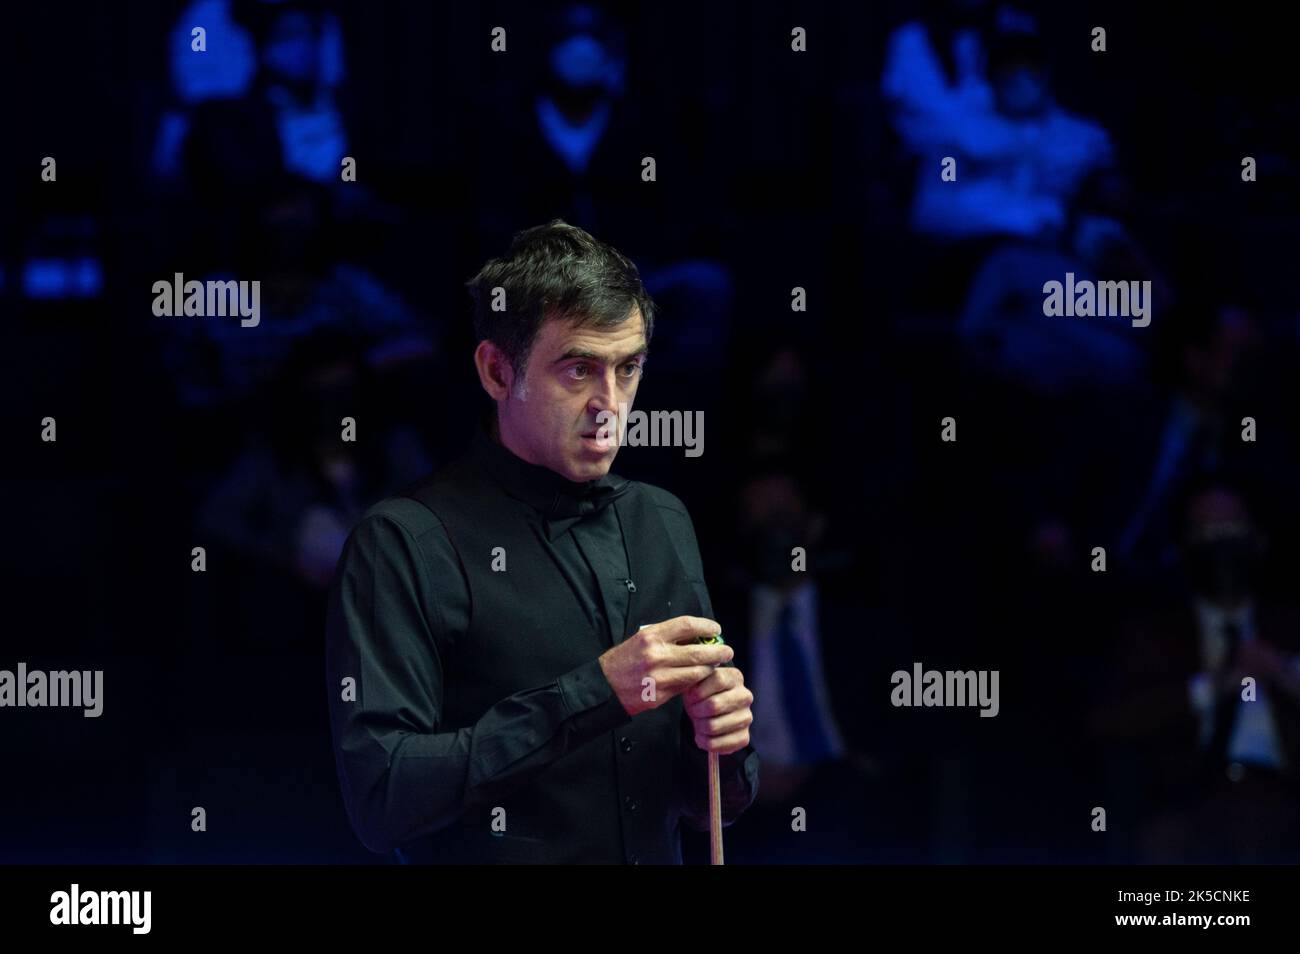 Hong Kong, China. 07th Oct, 2022. Current world champion and world number one English player Ronnie O'Sullivan seen in action during the fourth quarter-final match of Hong Kong Masters snooker tournament against Hongkonger Ng On Yee. Final score; Ronnie O'Sullivan 5:0 Ng On Yee. Credit: SOPA Images Limited/Alamy Live News Stock Photo